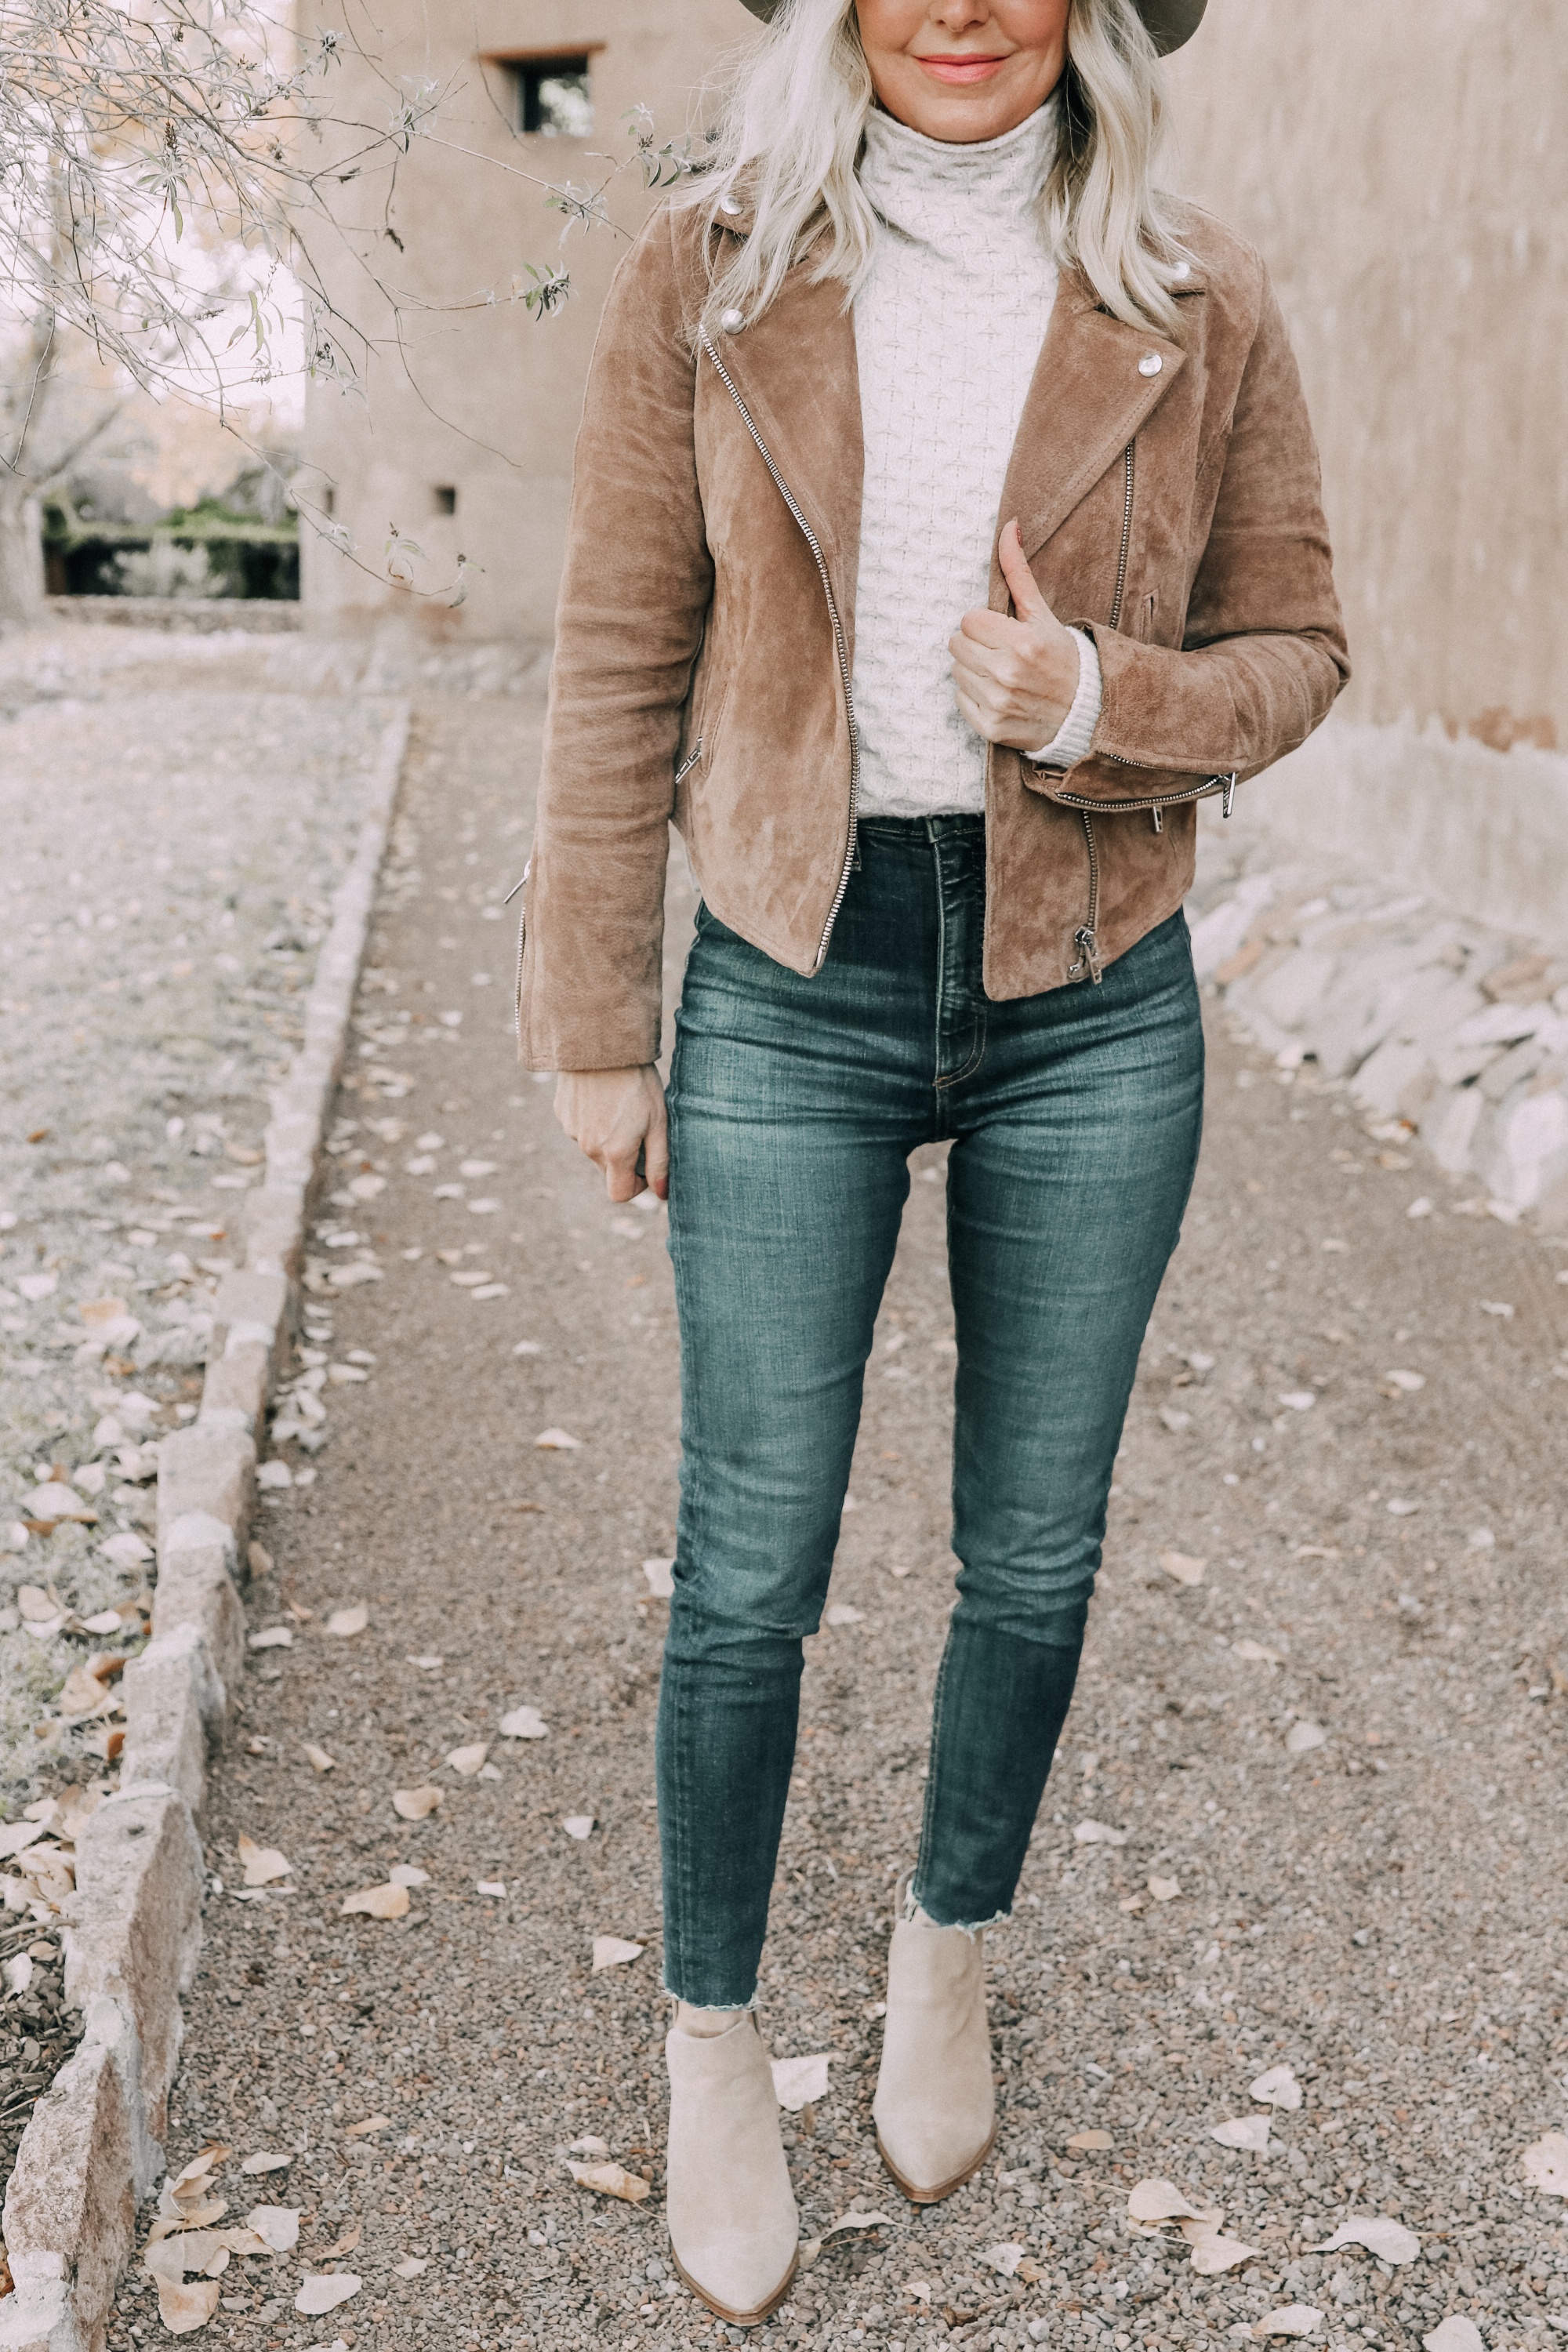 everyday outfit including suede moto jacket cable cashmere sweater skinny jeans tan suede booties